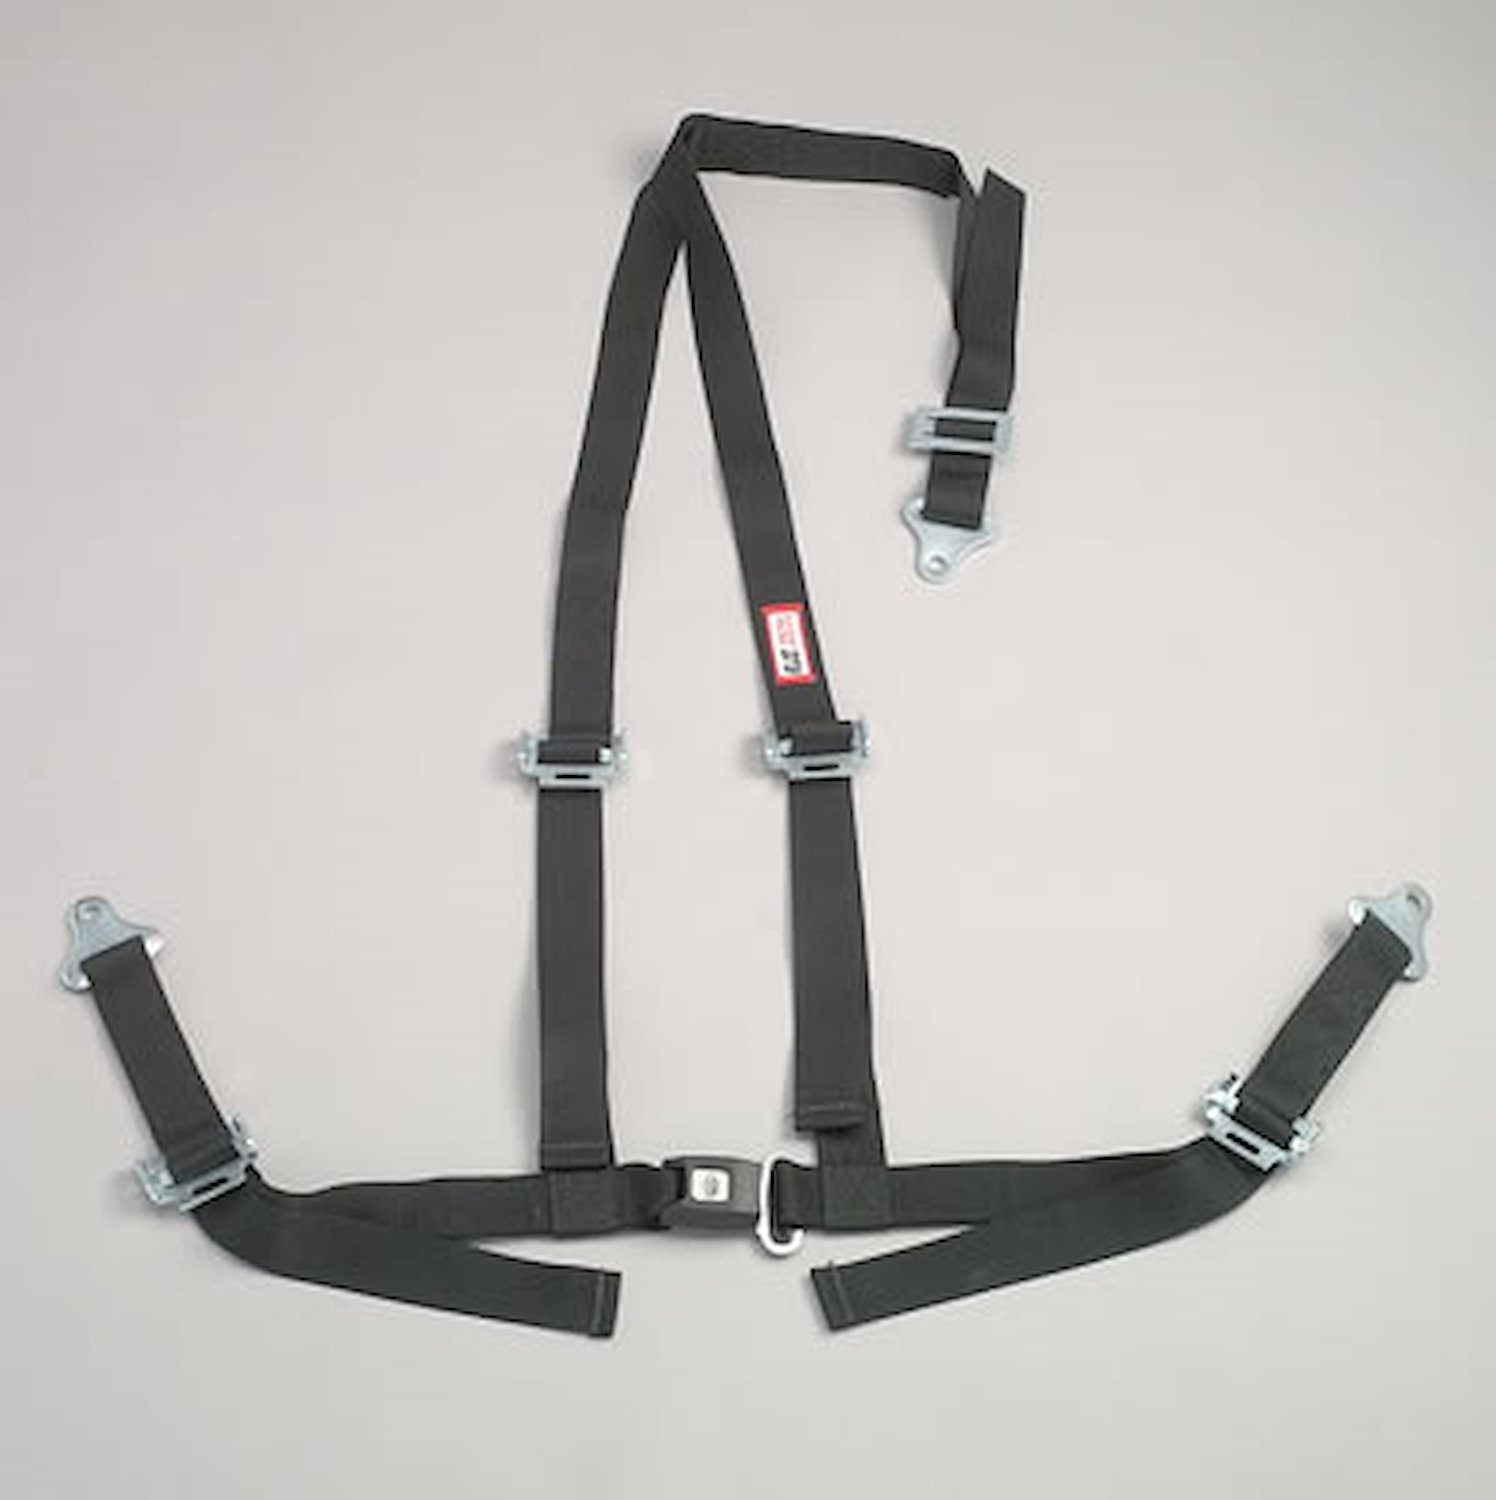 NON-SFI B&T HARNESS 2 PULL UP Lap Belt 2 S. H. Y FLOOR Mount ALL WRAP ENDS BLACK